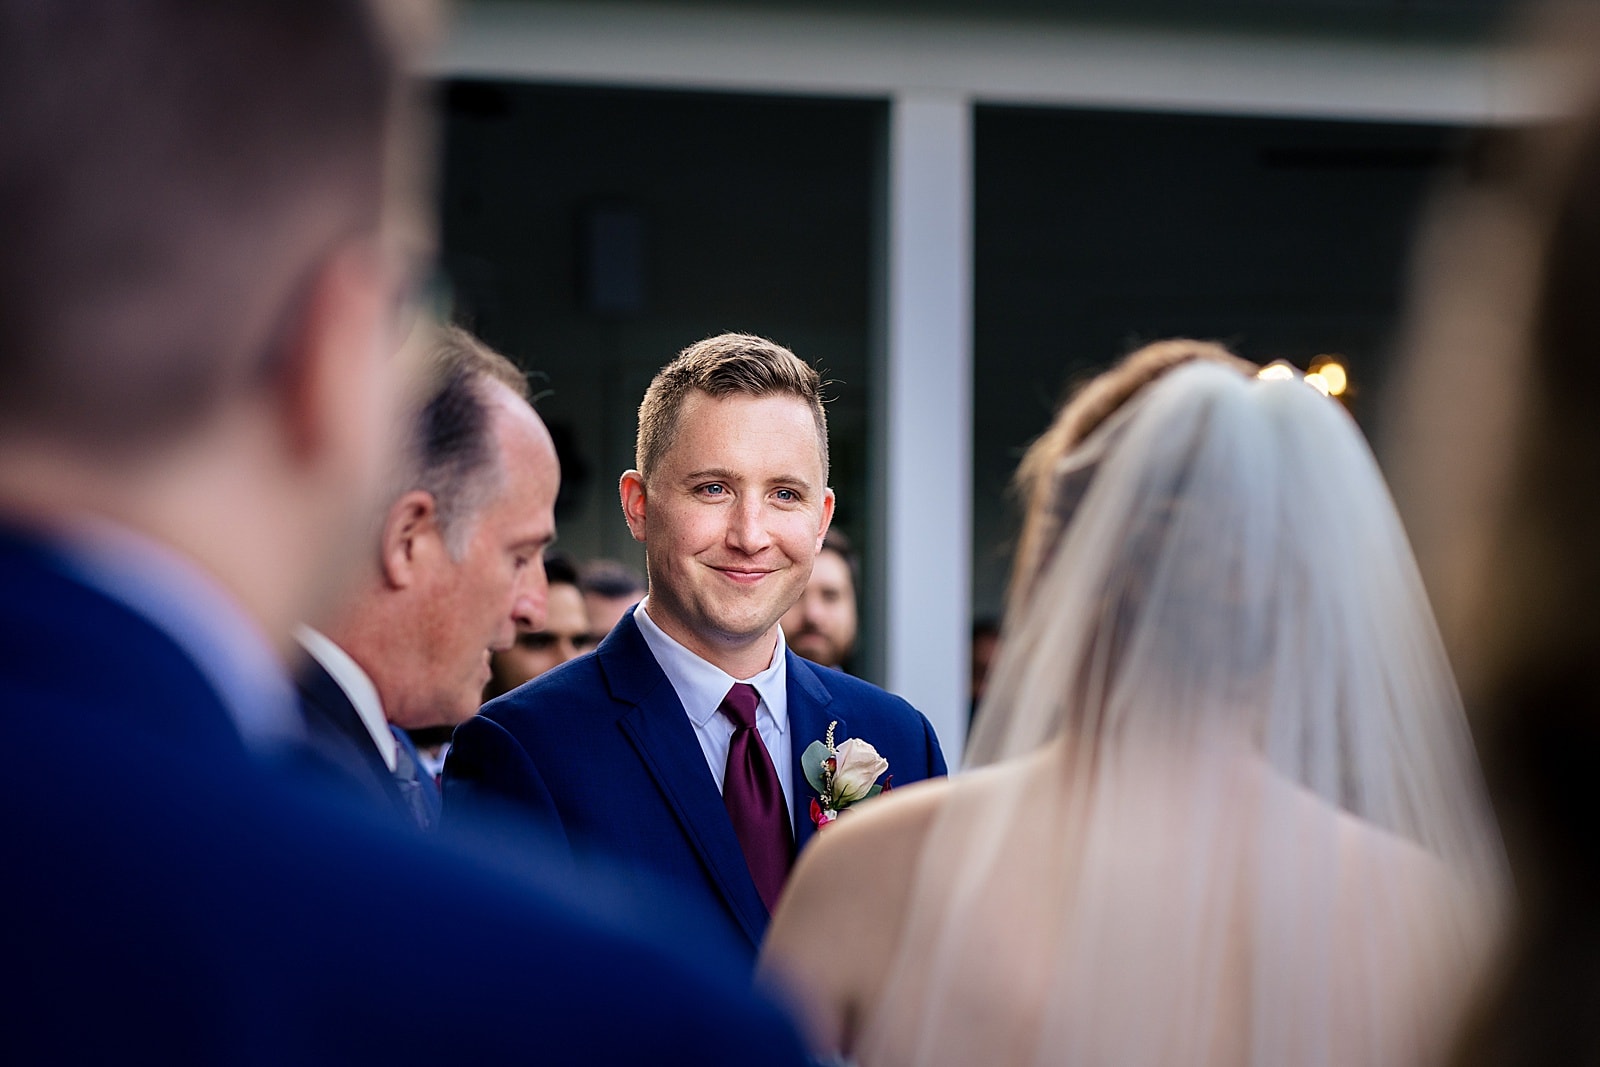 emotional wedding ceremony at Matthews House in Cary, NC